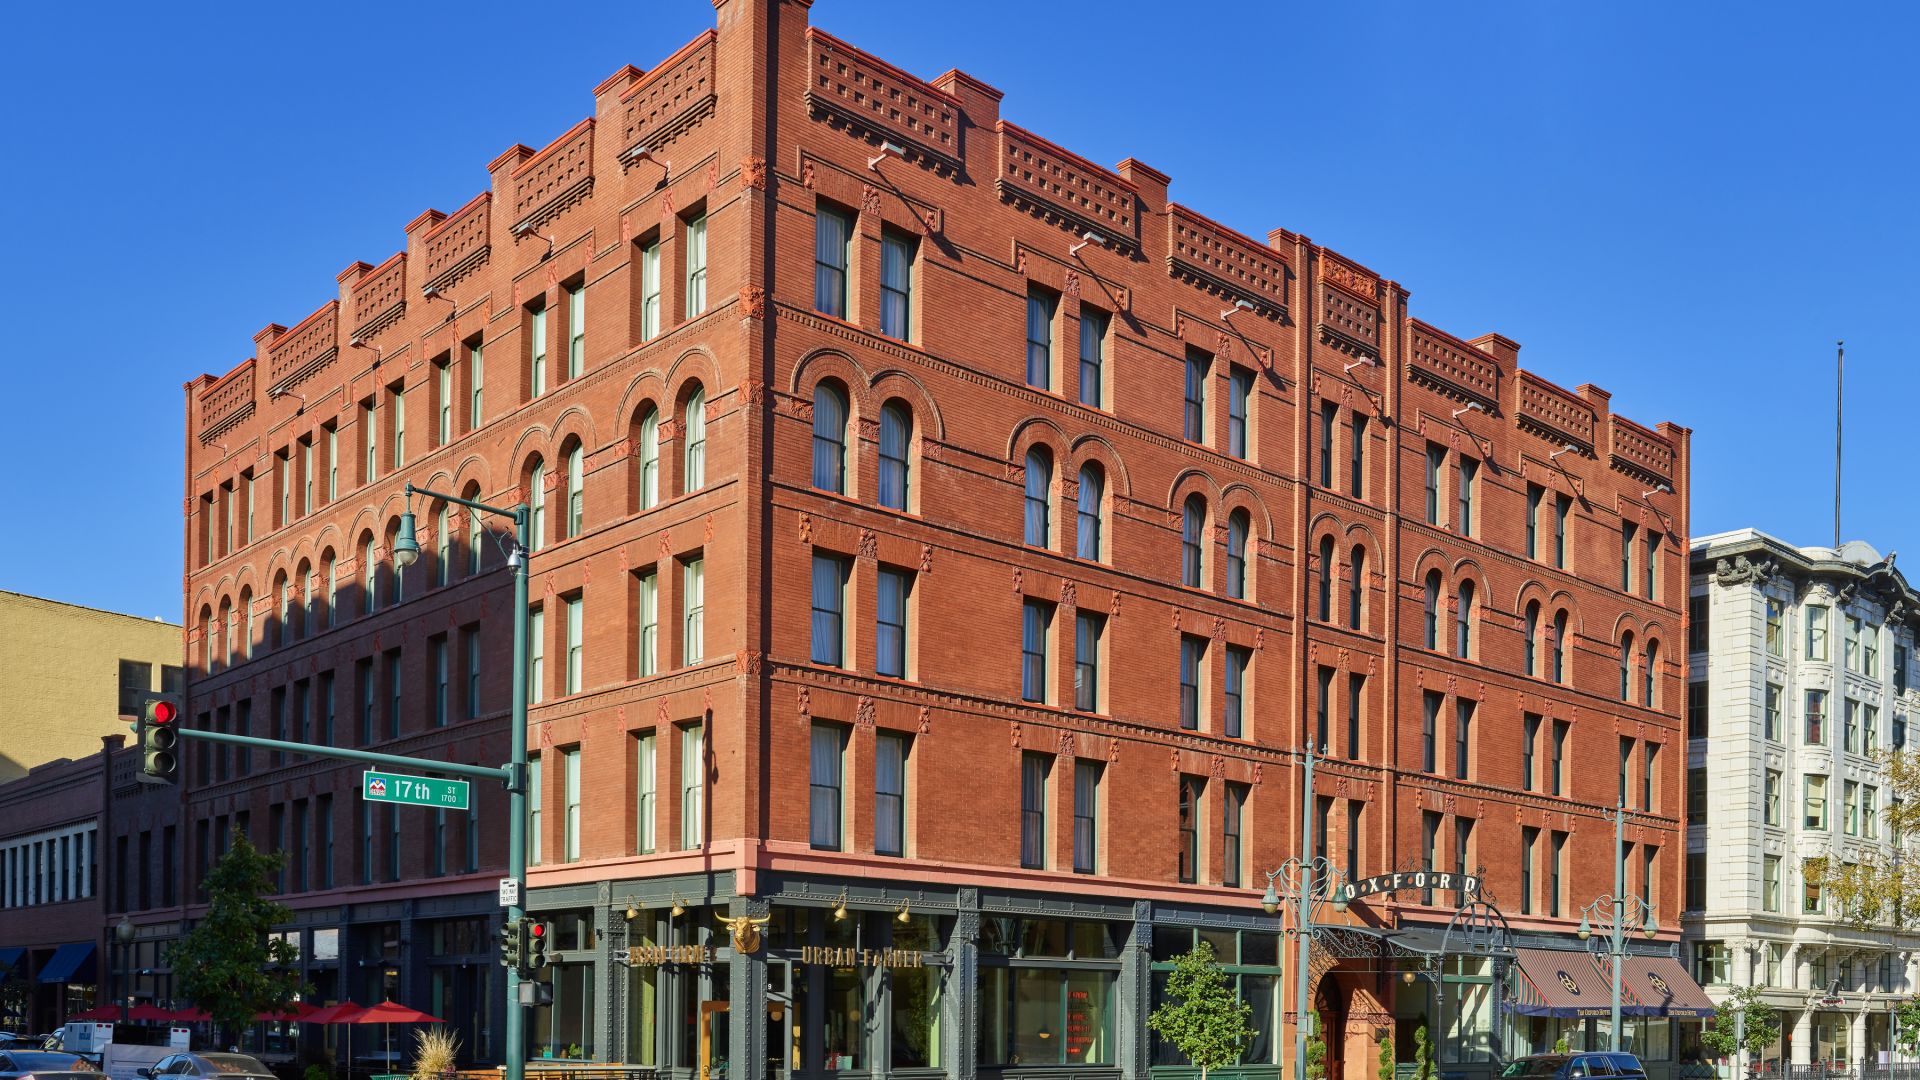 The exterior of The Oxford Hotel - Historic Red Brick Building, Corner of 17th and Wazee